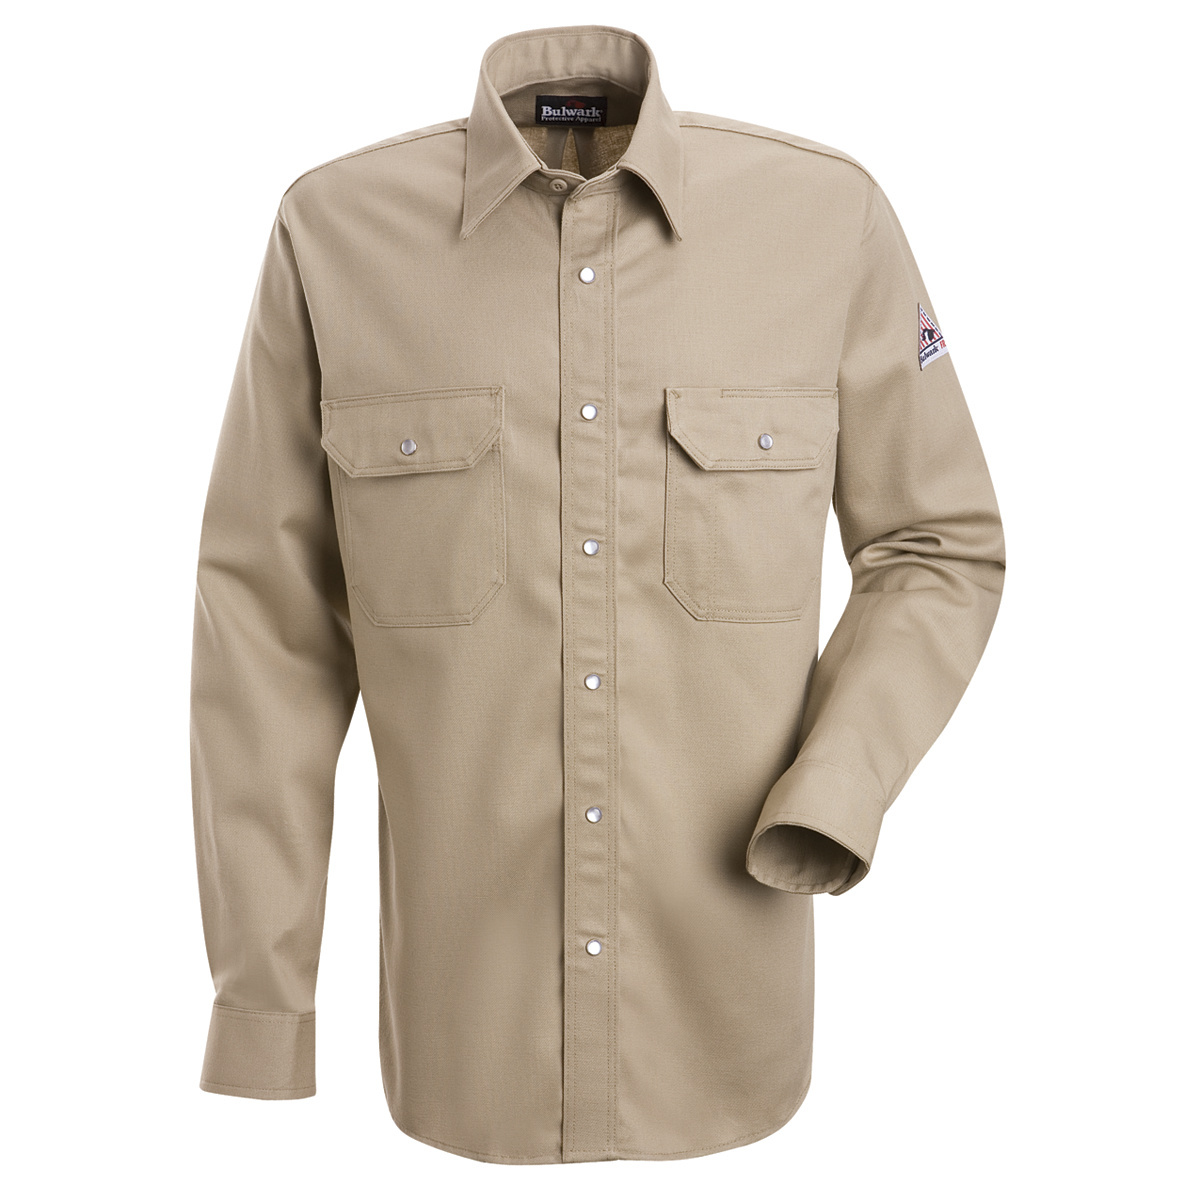 Bulwark® 2X Tall Tan EXCEL FR® Cotton Flame Resistant Uniform Shirt With Snap Front Closure